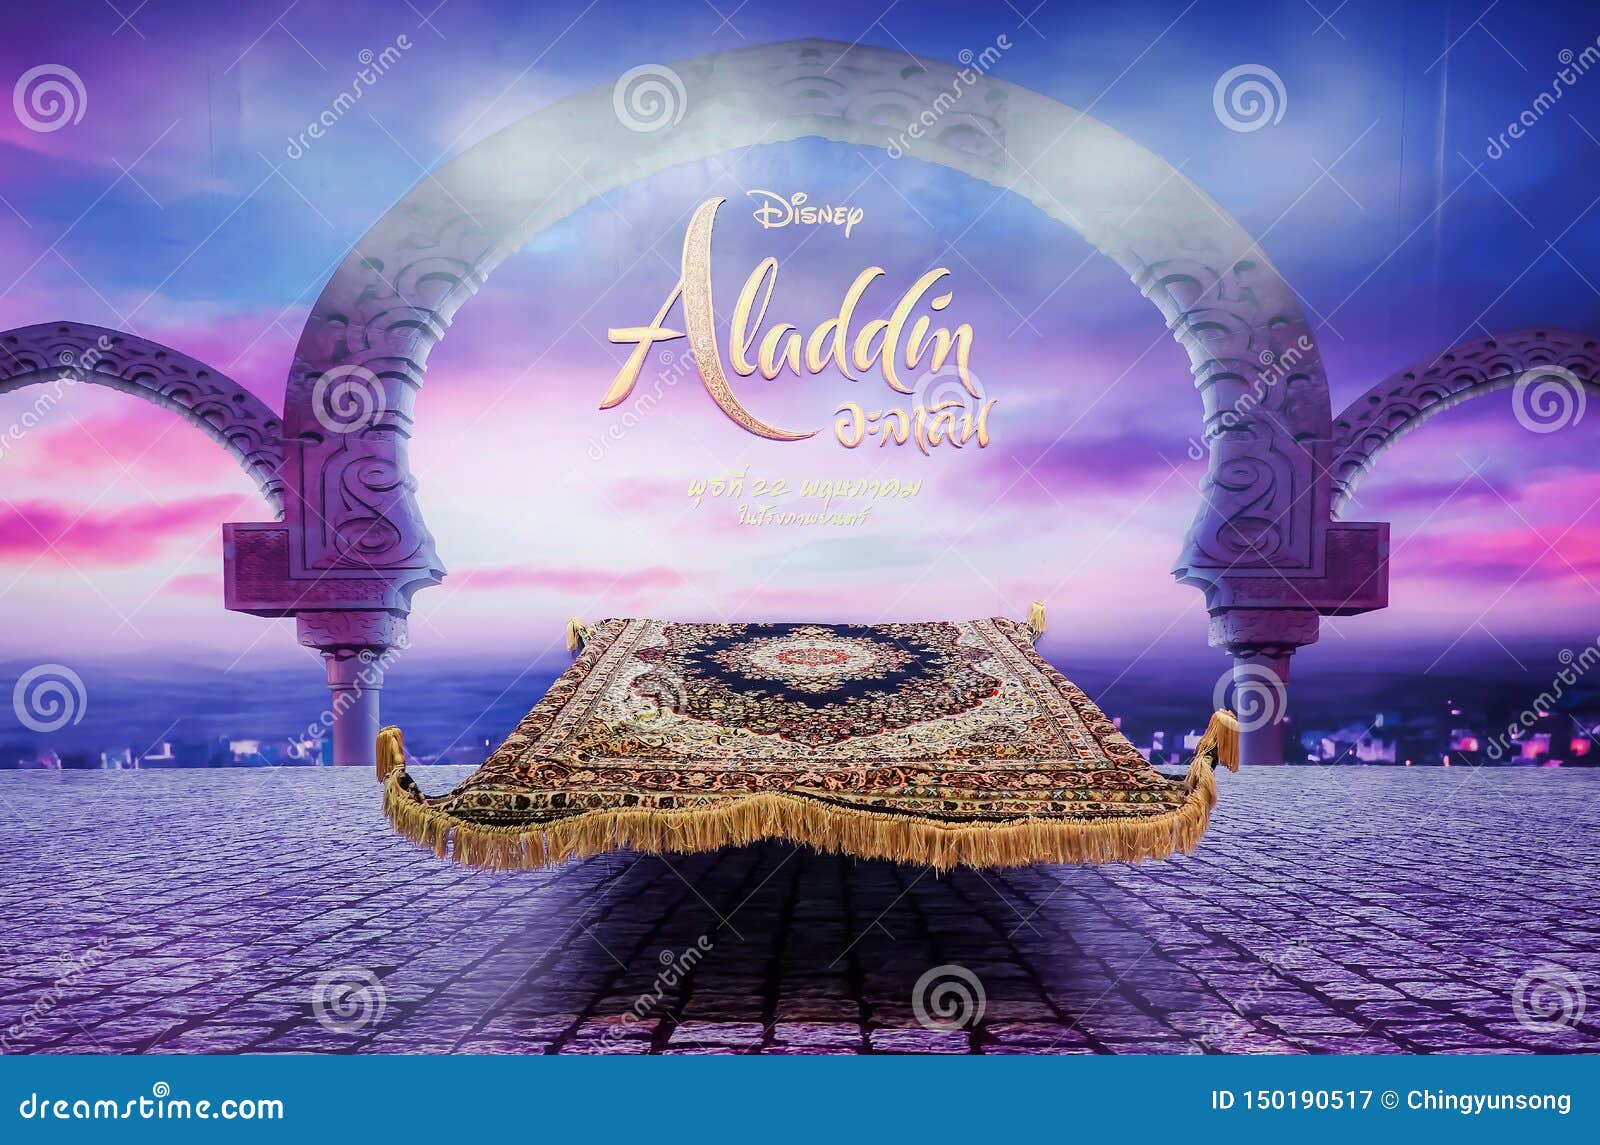 A Photo Of Movie Standee Of A Magic Carpet In Front Of A Twilight Scene In Aladdin To Promote